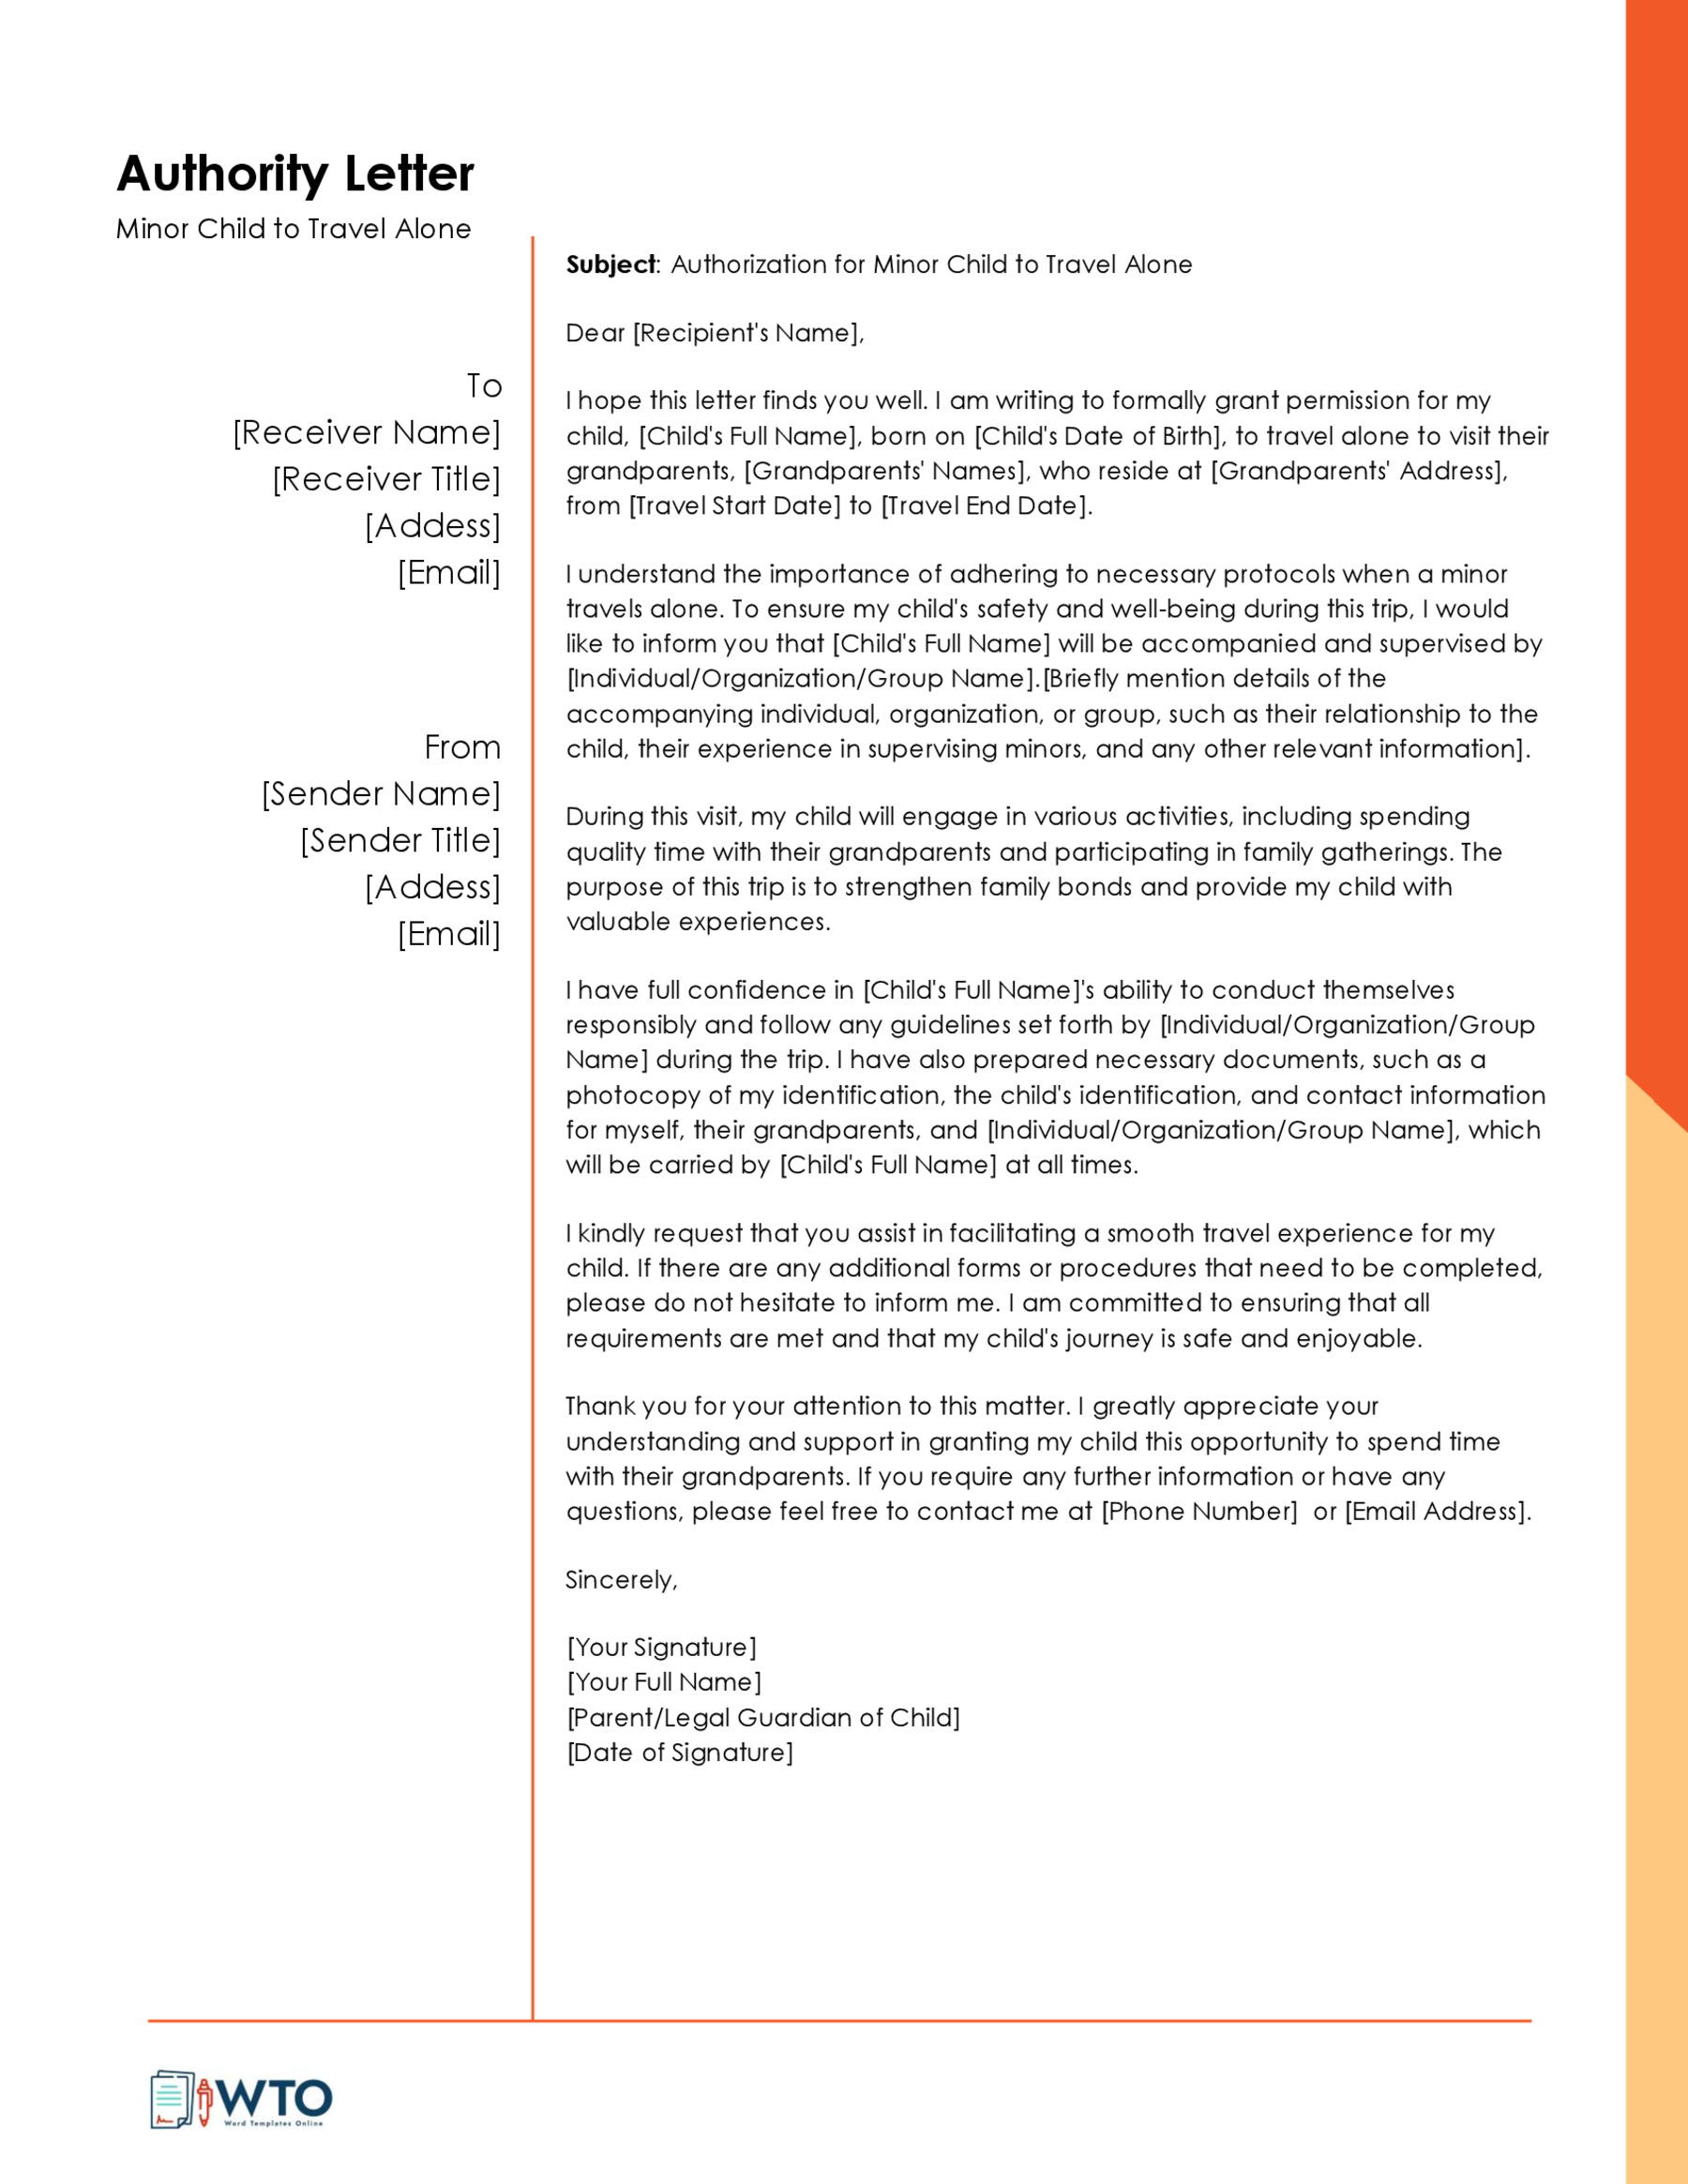 Authorization Letter for a Child to Travel Alone Template -Free Download